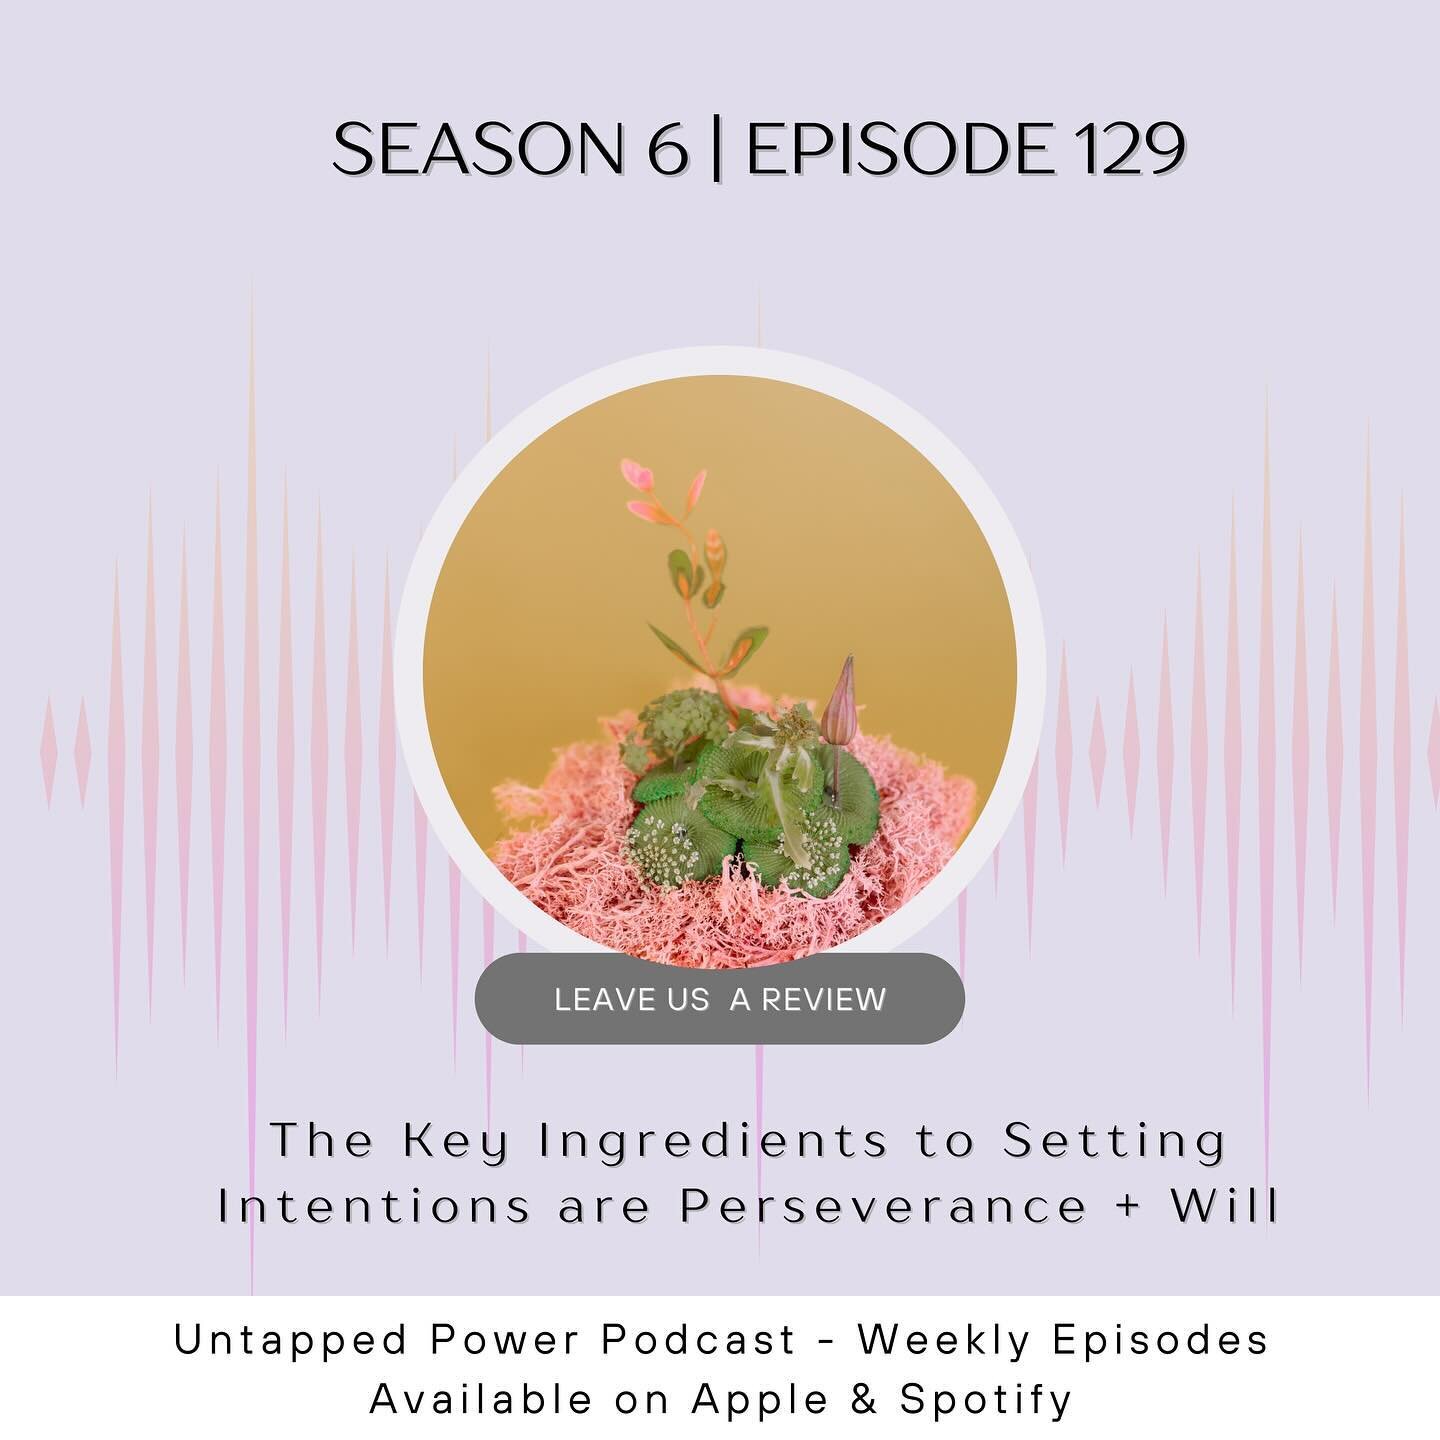 ✨✨New Year + New Intentions✨✨

The two key ingredients to setting successful intentions are:

Perseverance + Will

Today&rsquo;s episode is breaking down our relationship to discipline and consistency and why it matters when it comes to setting inten